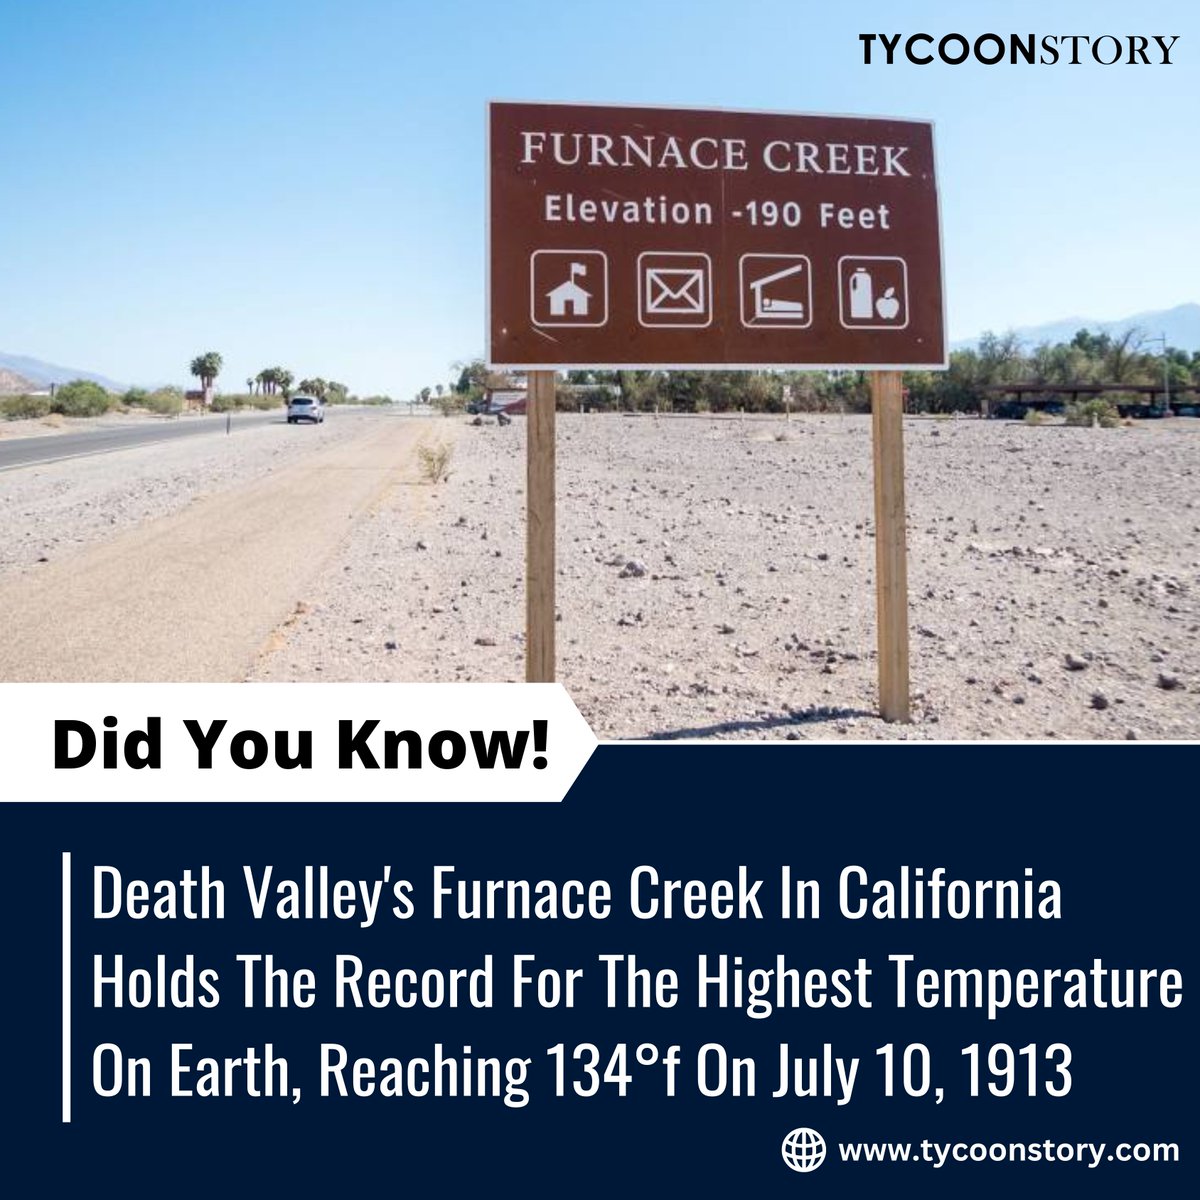 The Hottest Place on Earth: Death Valley's Furnace Creek

#deathvalley #furnacecreek #heatwave #desertheat #california #nationalparks #climateresearch #NaturePhotography @TycoonStoryCo @geeksforgeeks @twinklresources @tycoonstory2020 @themanualguide